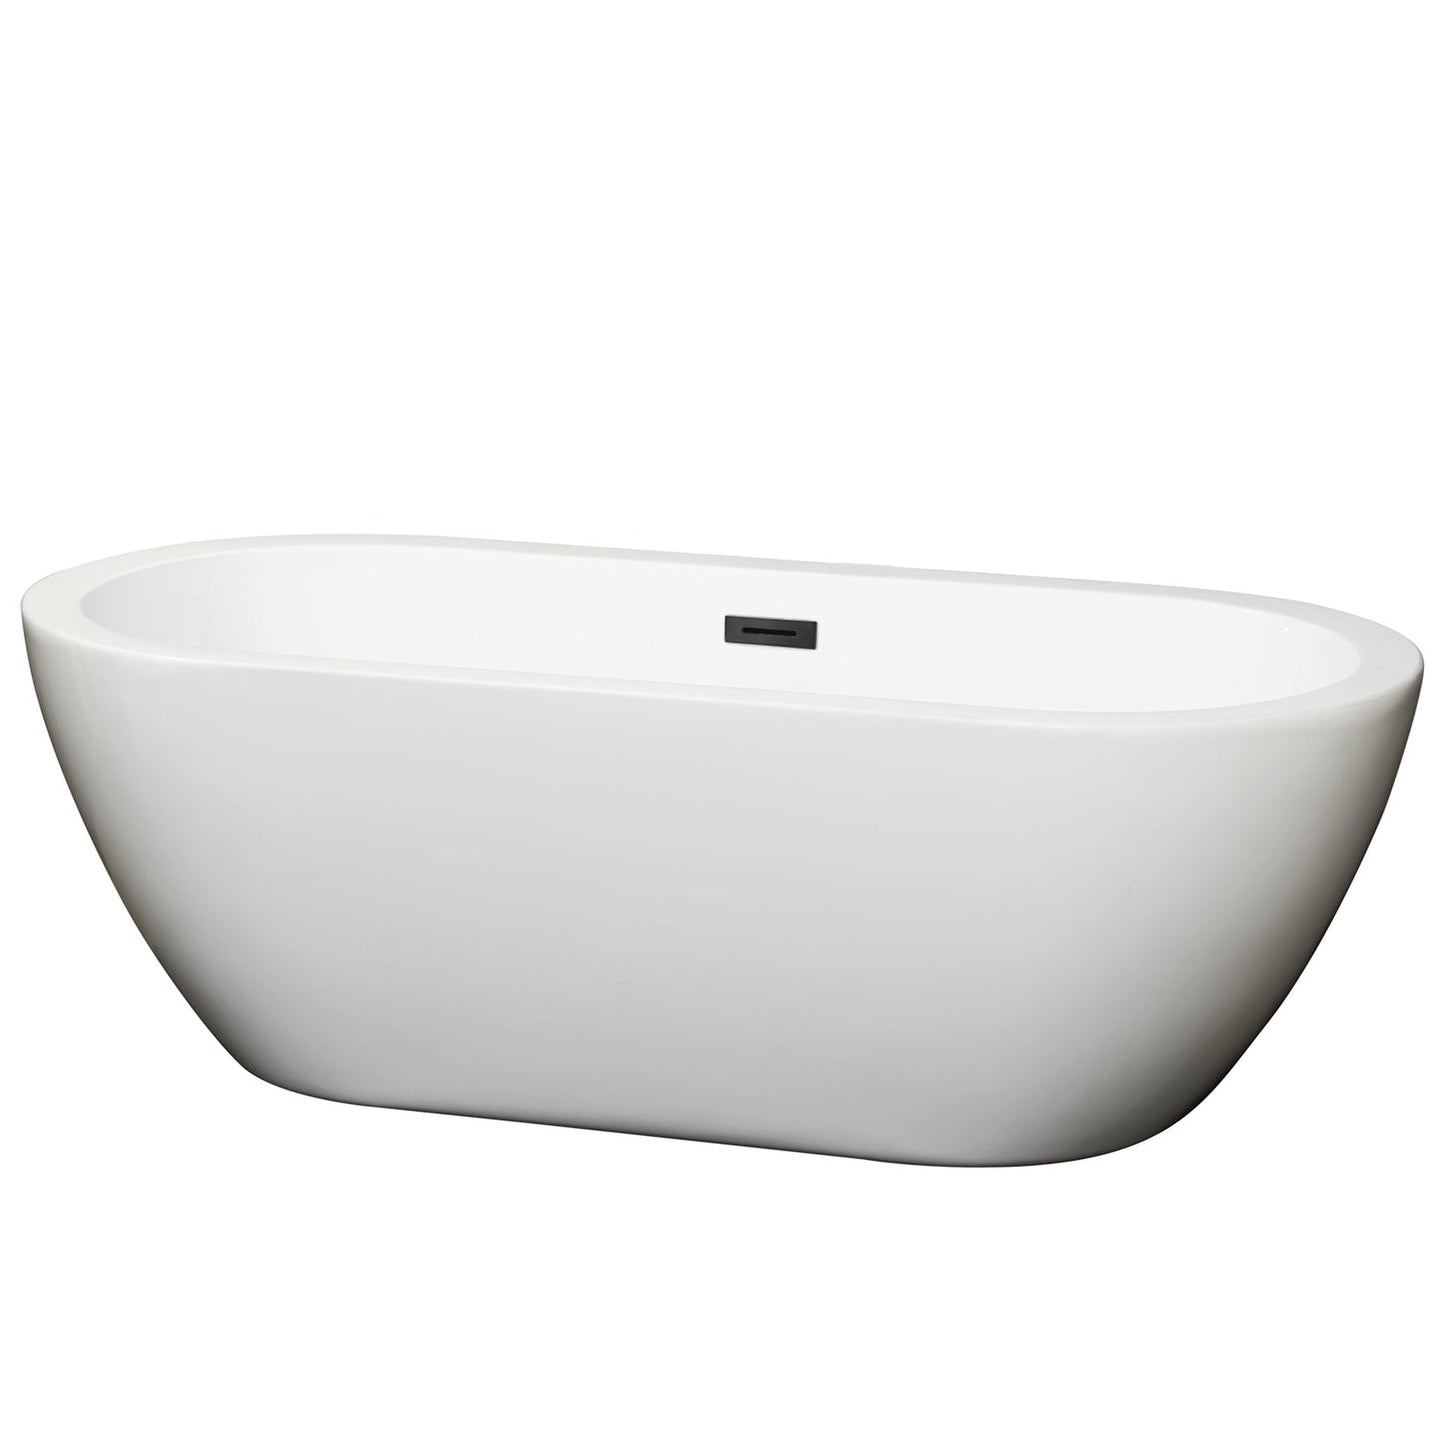 Wyndham Collection Soho 60" Freestanding Bathtub in White With Matte Black Drain and Overflow Trim